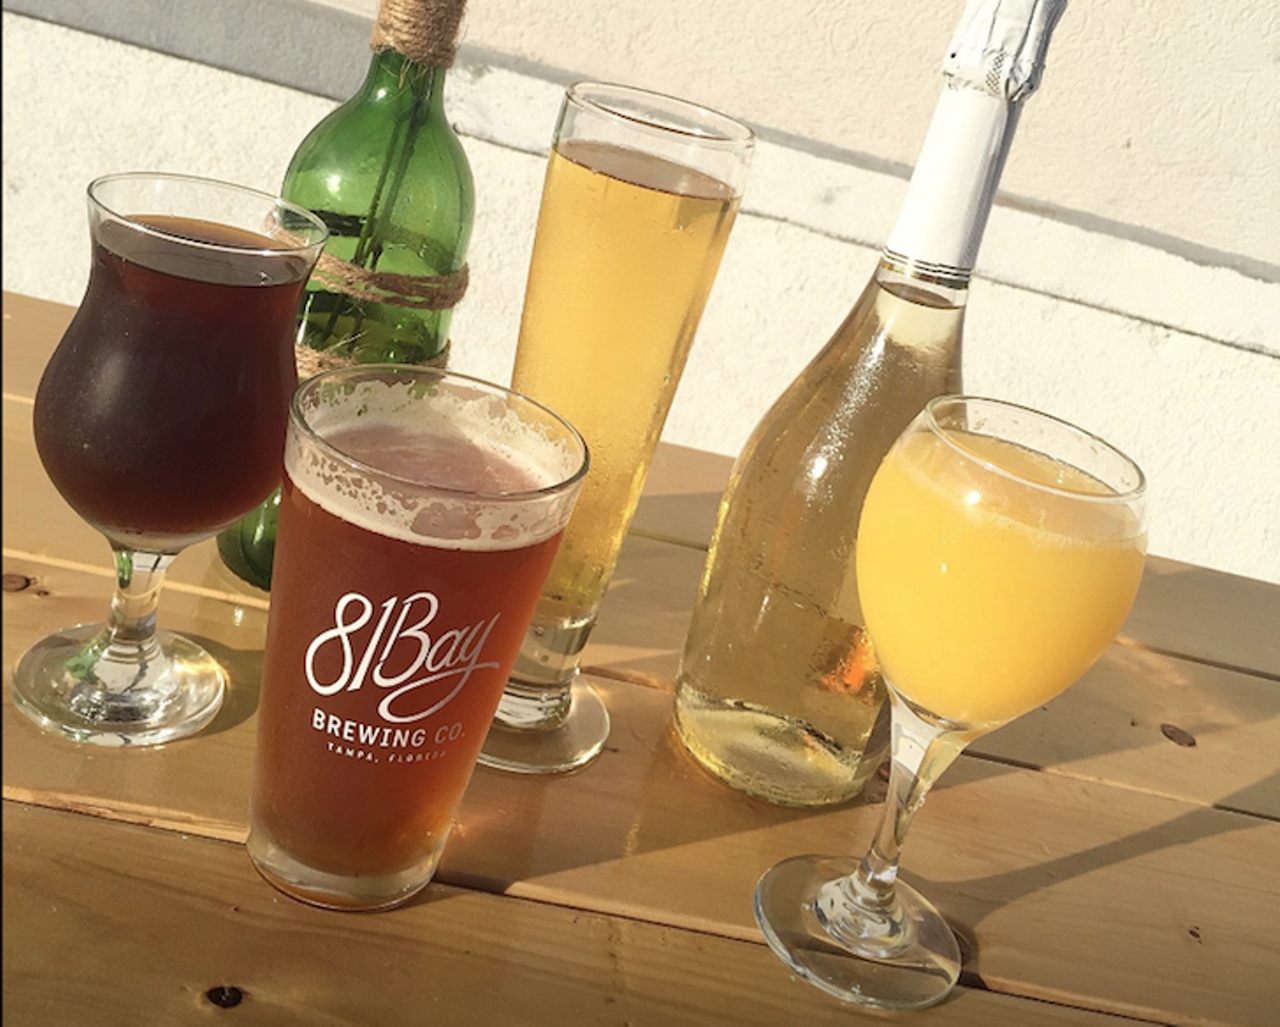 81Bay Brewing Company  
4465 W. Gandy Blvd. #600, Tampa, 813-837-2739
This South Tampa microbrewery and taproom offers $15 bottomless mimosas from 12 p.m. to 4 p.m. every Sunday. They also keep a rotation of food trucks on site, just in case you weren&#146;t planning to drink your whole brunch.
Photo via 81Bay Brewing Company/Facebook